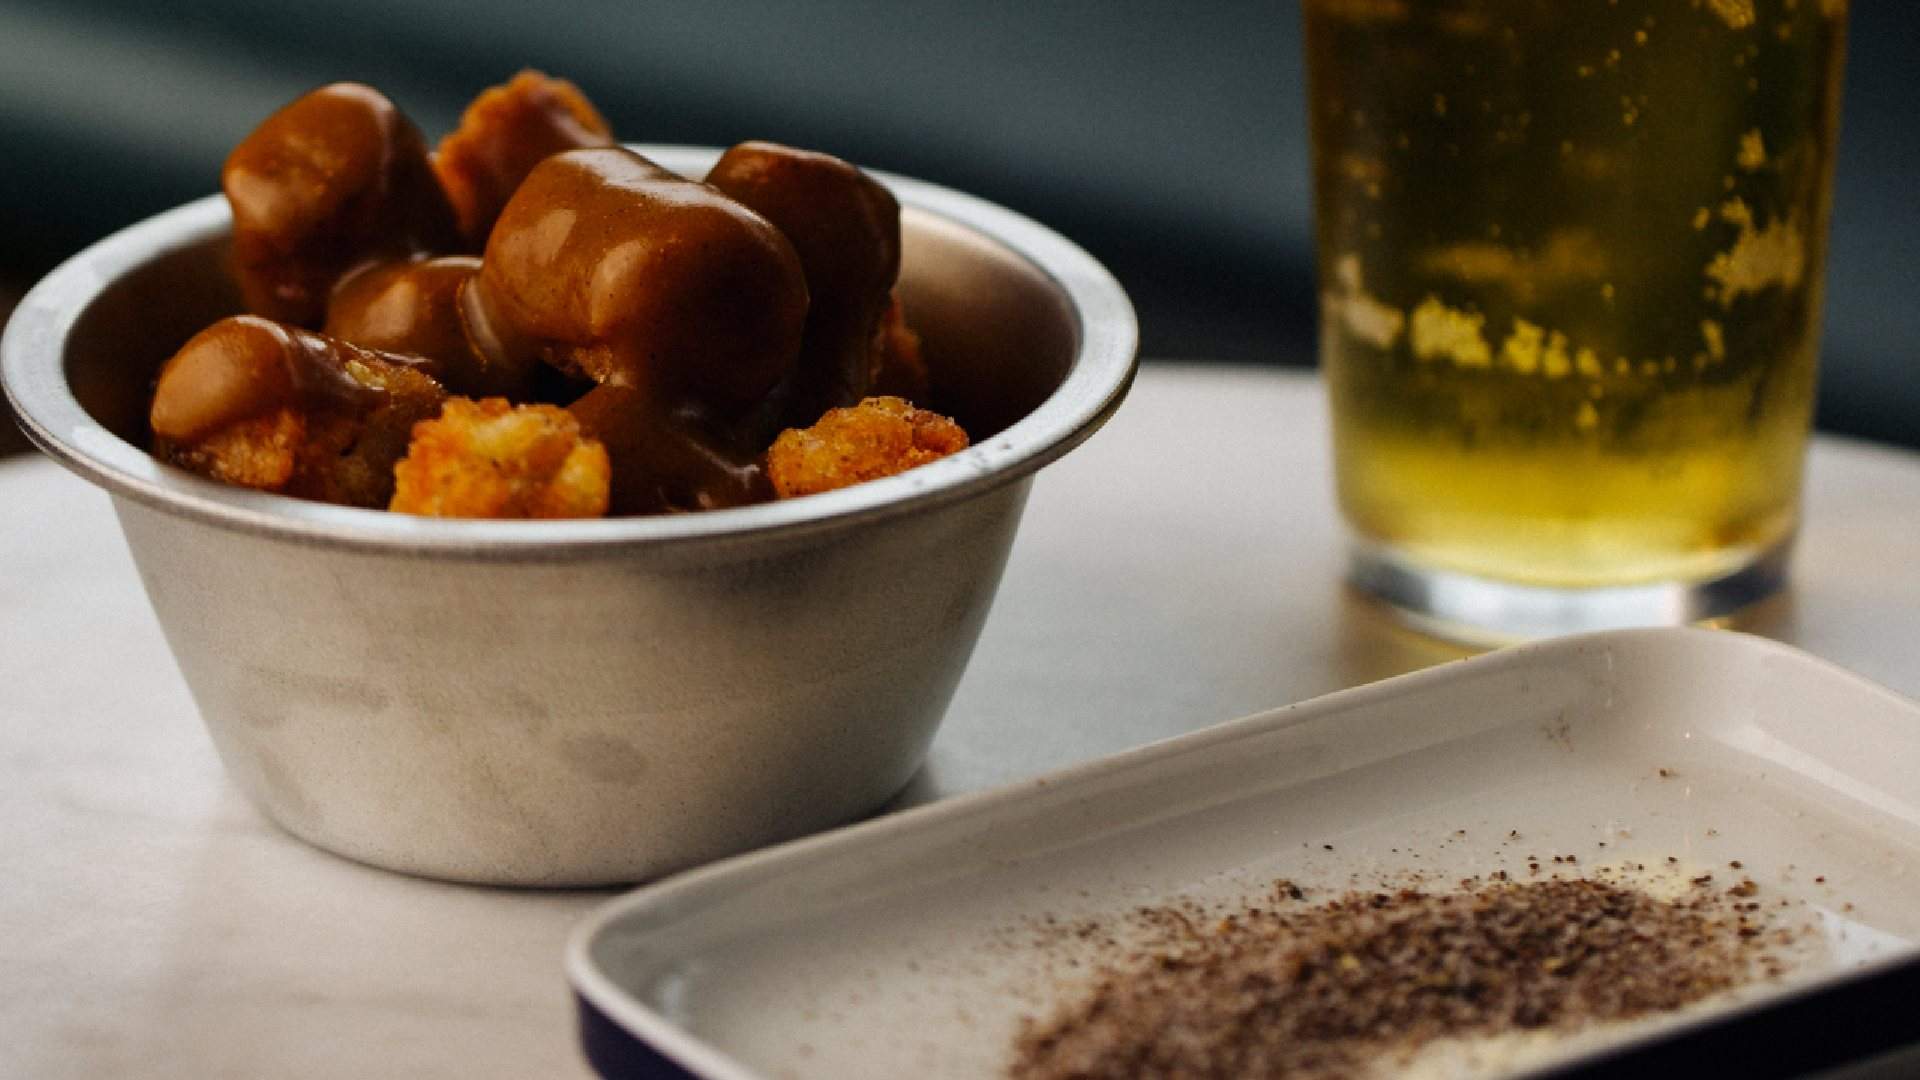 Crofter Dining Room & Bar Is Lygon Street's New Home of British-Style Meals and Bar Snacks